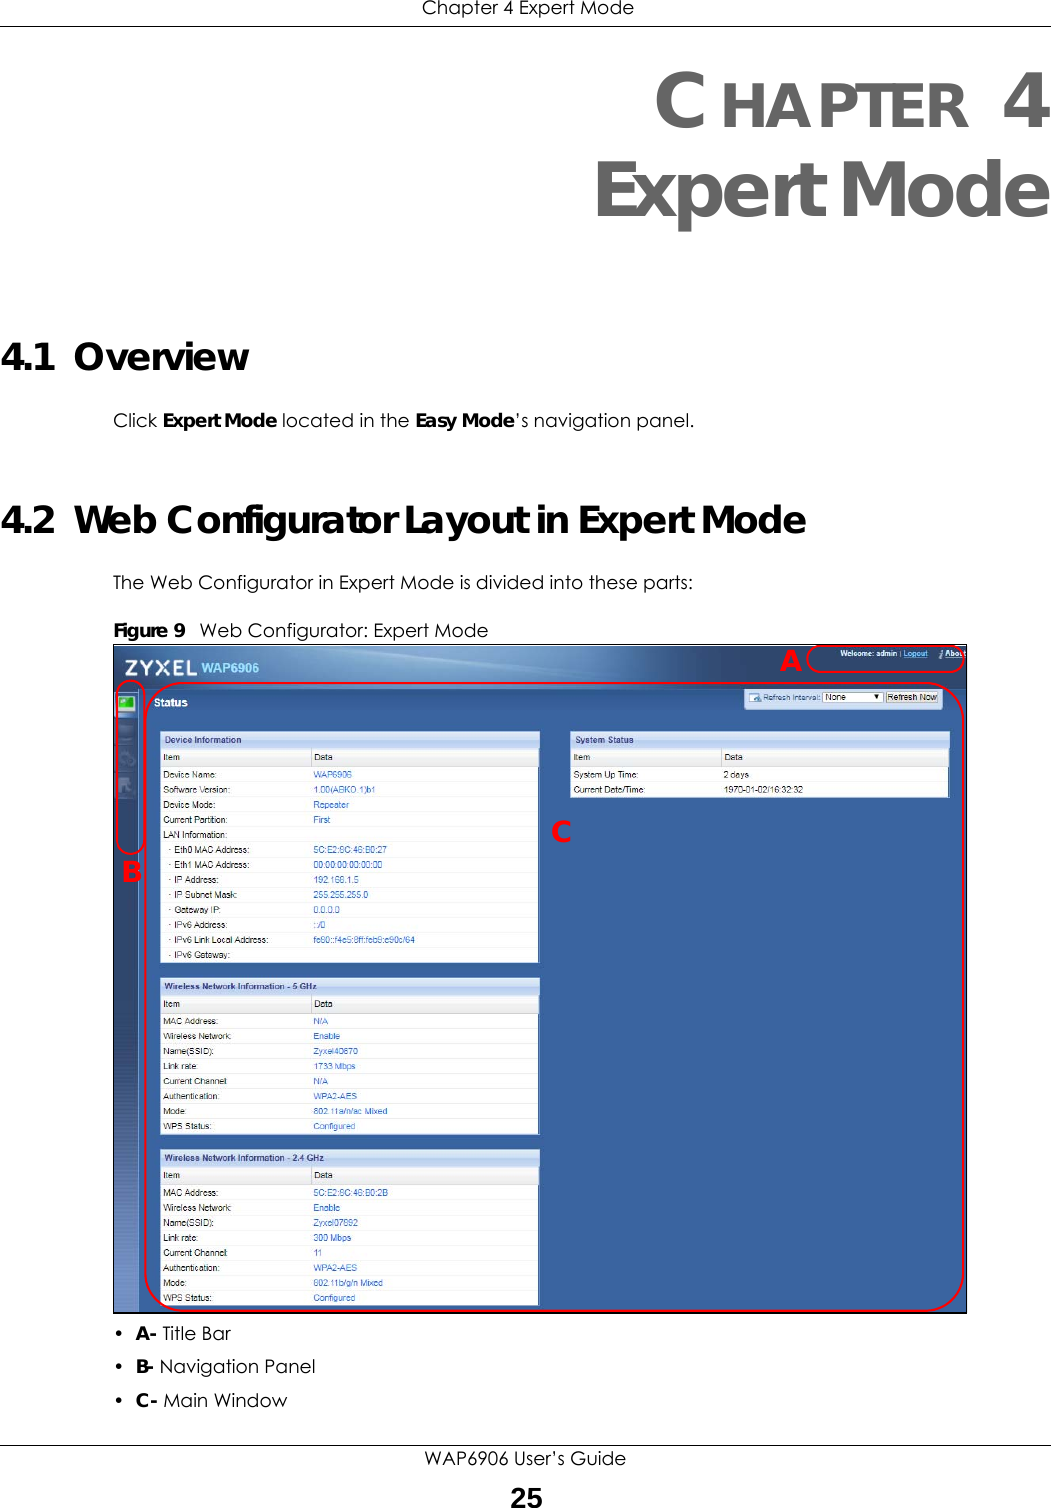  Chapter 4 Expert ModeWAP6906 User’s Guide25CHAPTER 4Expert Mode4.1  OverviewClick Expert Mode located in the Easy Mode’s navigation panel. 4.2  Web Configurator Layout in Expert ModeThe Web Configurator in Expert Mode is divided into these parts:Figure 9   Web Configurator: Expert Mode•A- Title Bar•B- Navigation Panel•C- Main WindowBAC